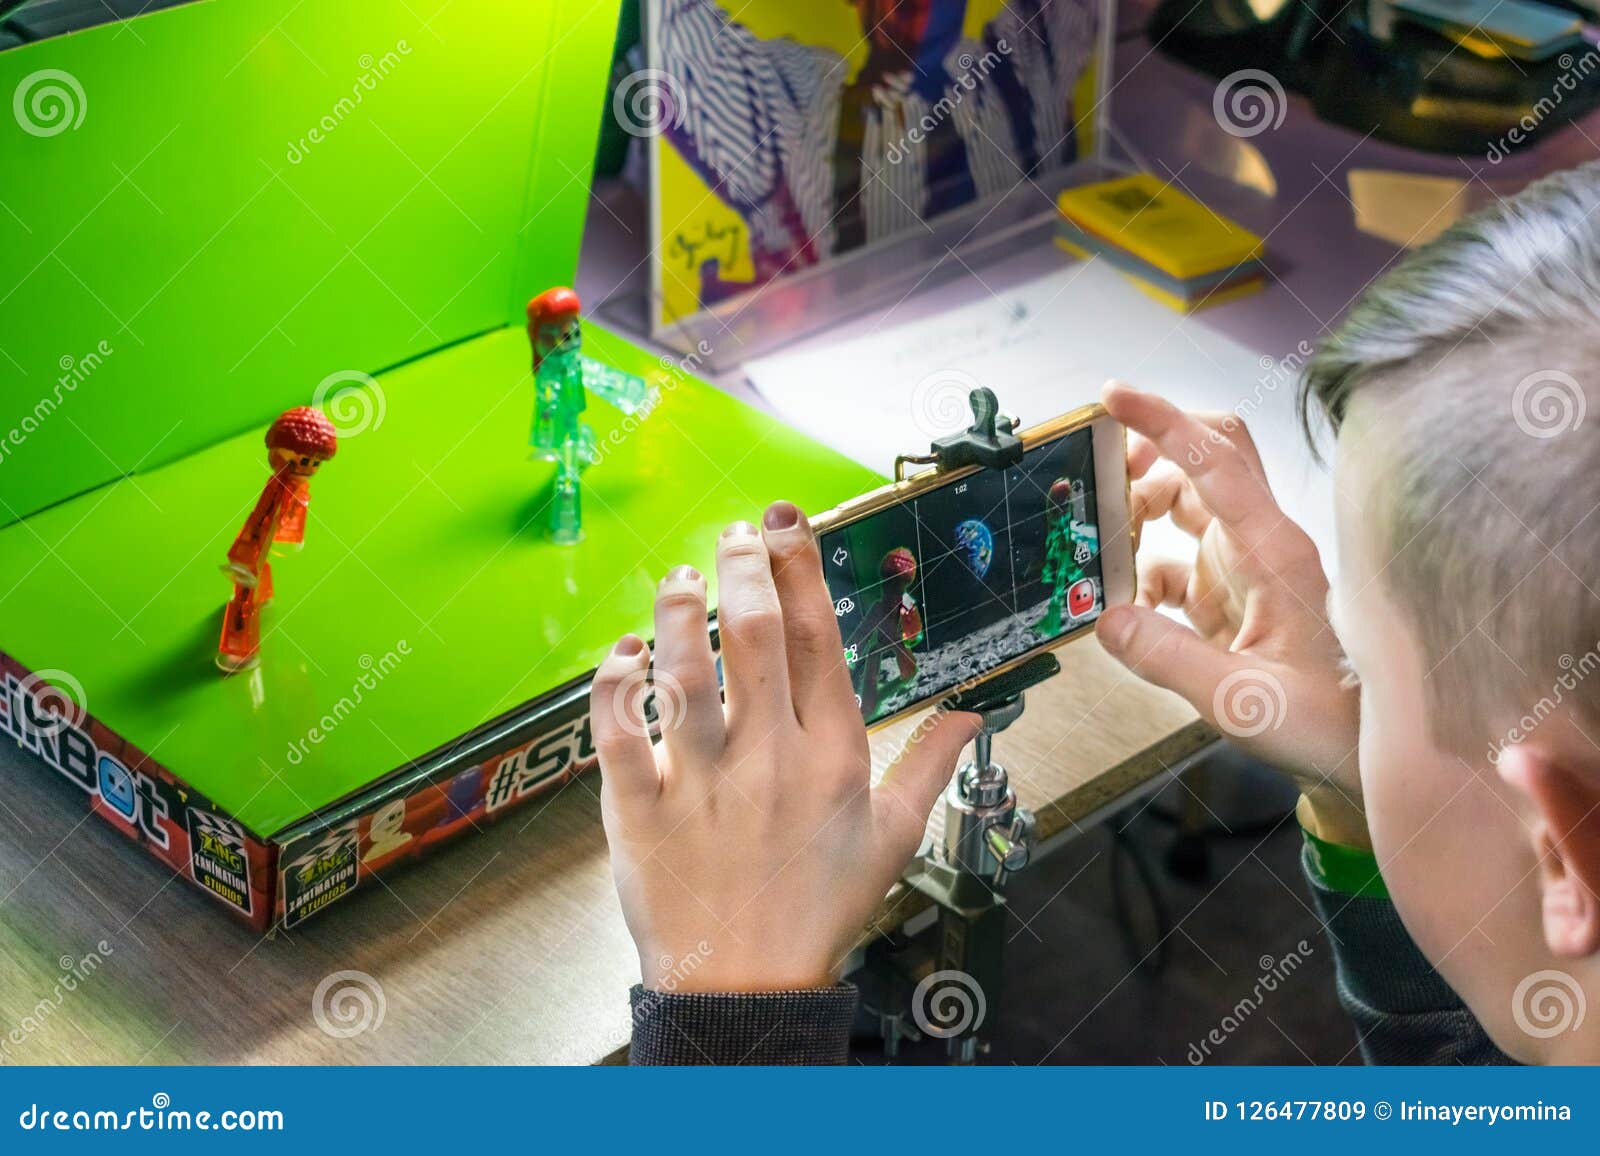 Stop Motion Animation Process with Stikbot Details and Toy Figures. Boy  Expose Stop Motion Elements To Create Animations Using Sma Editorial Stock  Image - Image of figures, abstract: 126477809